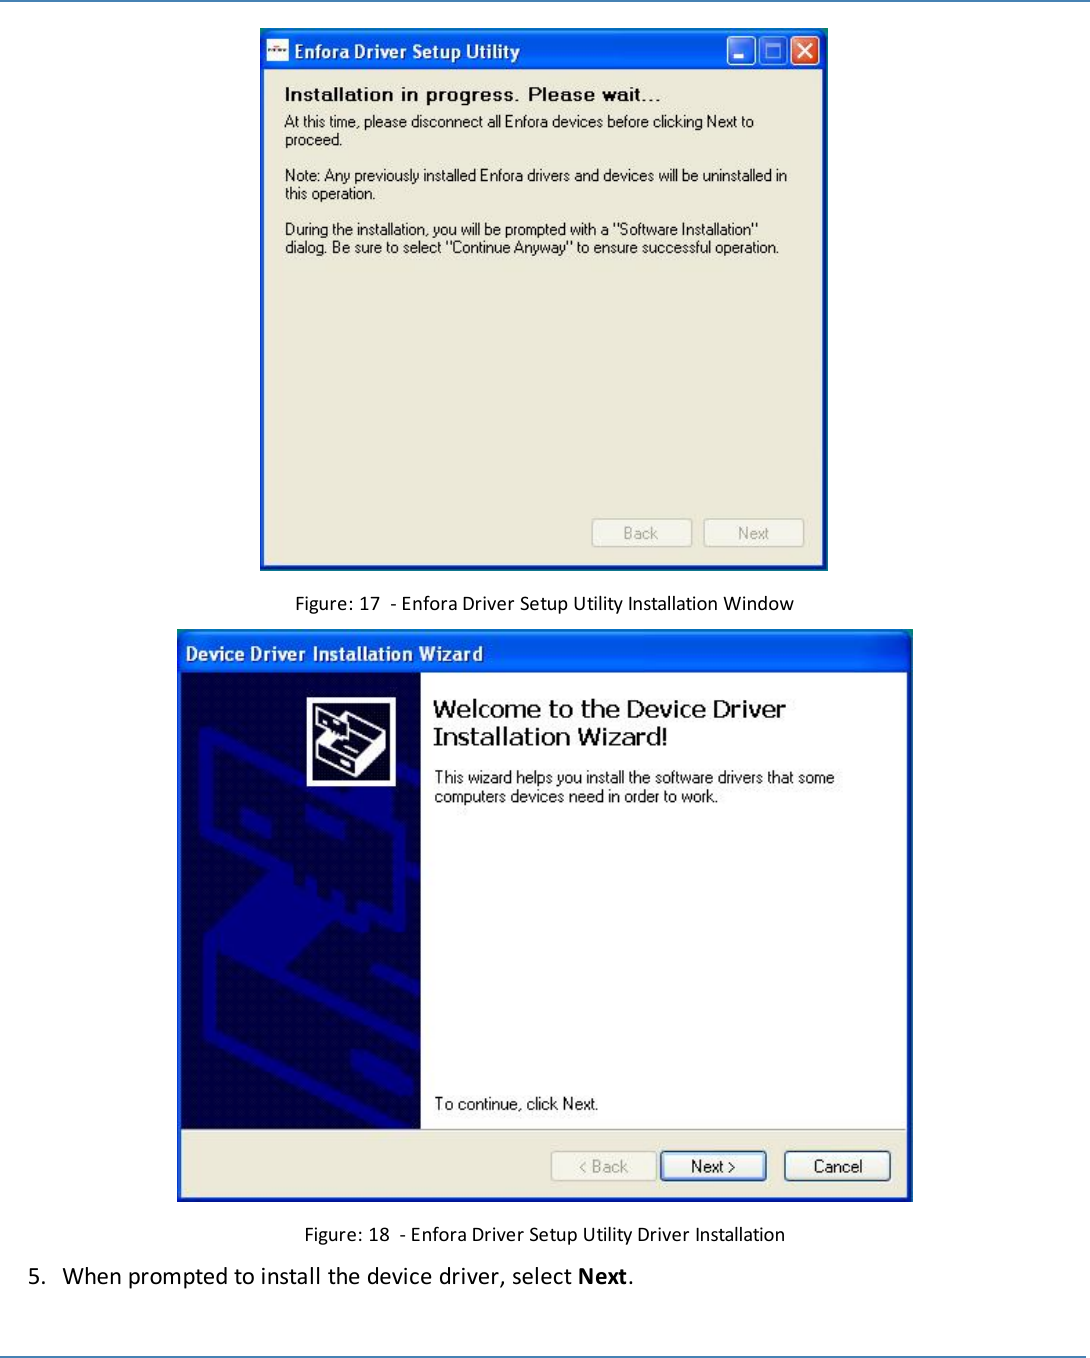 24Figure: 17 - Enfora Driver Setup Utility Installation WindowFigure: 18 - Enfora Driver Setup Utility Driver Installation5. When prompted to install the device driver, select Next.